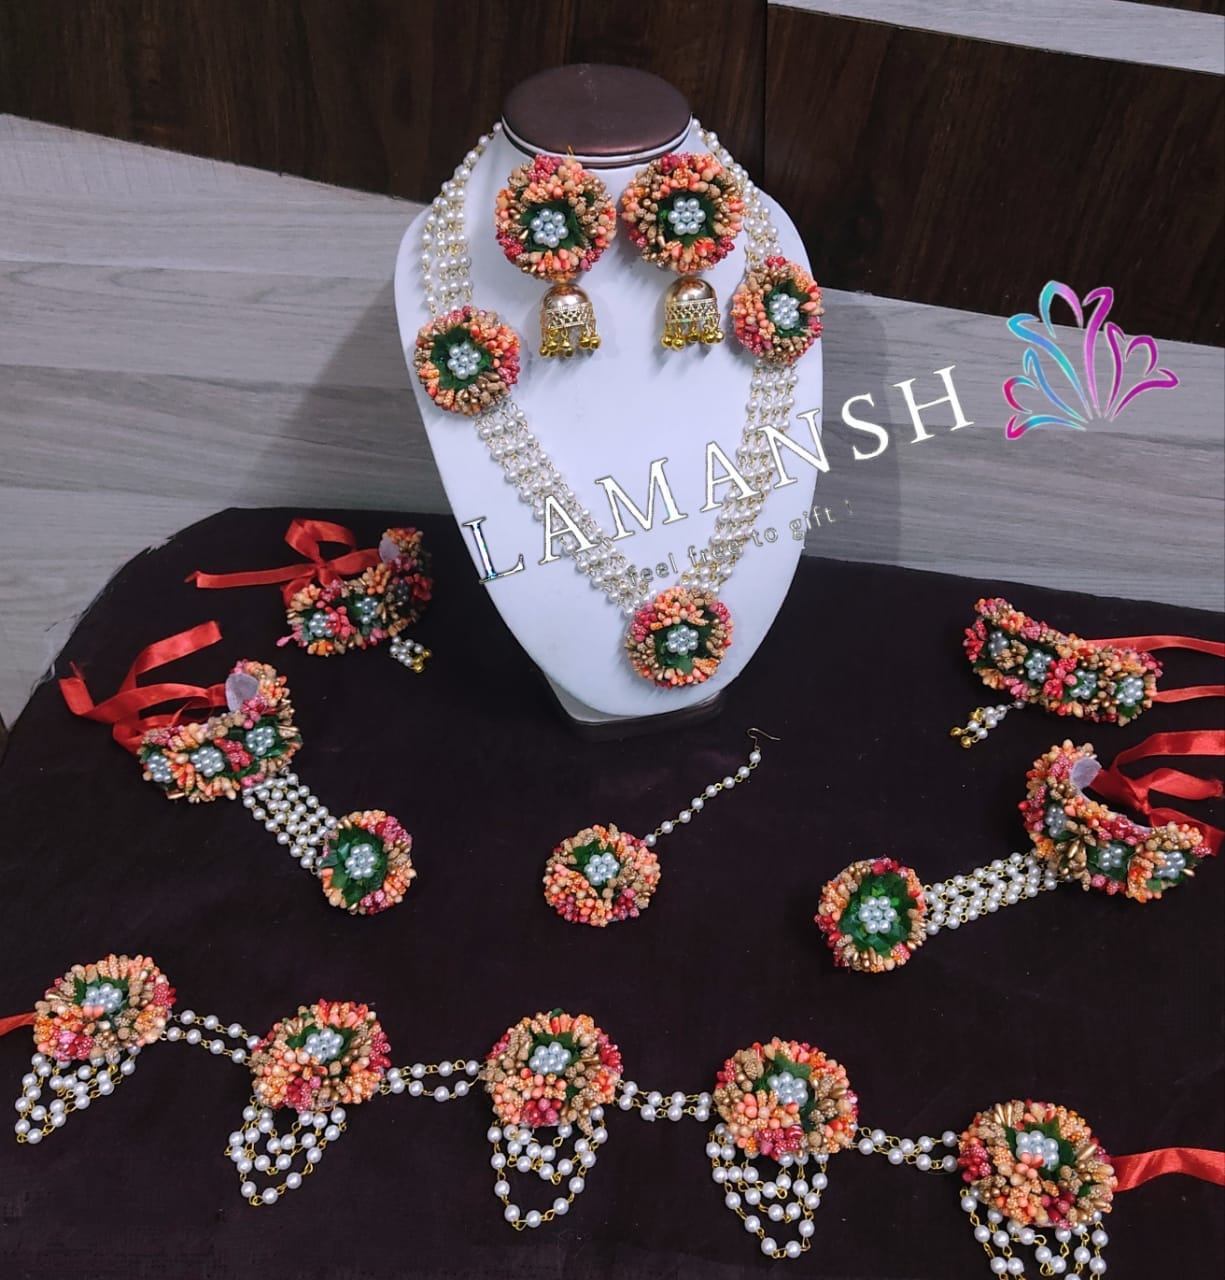 Lamansh Baby 👶shower 1 Necklace, 2 Armlets Bajuband , 2 jhumki Earrings  , 1 Maangtika, 1 Kamarband & 2 Bracelets attached to Ring / Red, Orange, Gold, White LAMANSH® Gorgeous Floral 🌺 Jewellery Set for Haldi / Best for Baby Shower